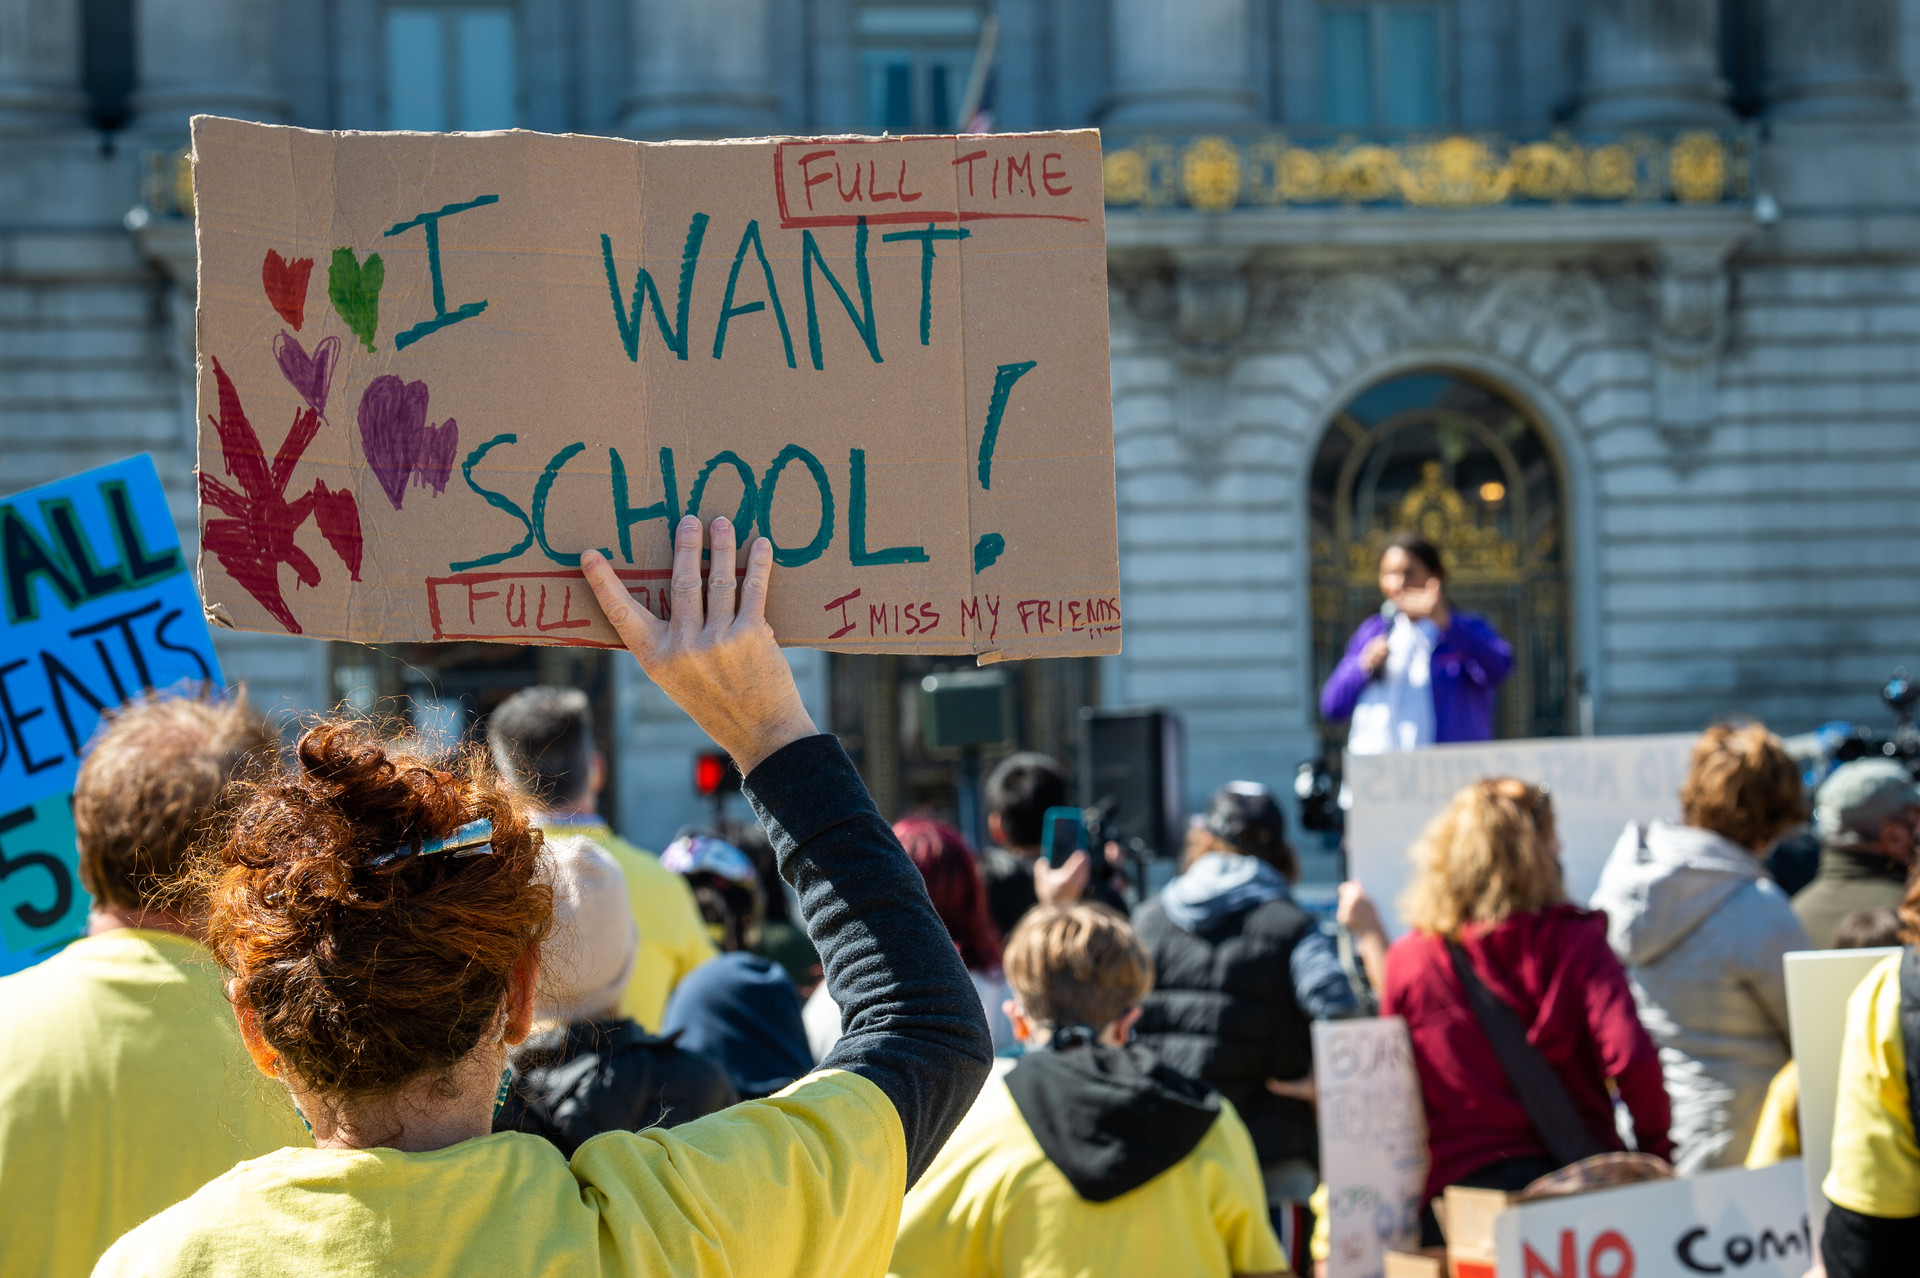 Protest sign saying "I want school! Full time. I miss my friends" in foreground of crowd before City Hall. Protestors in yellow T-shirts, Mayor Breed at podium in background.